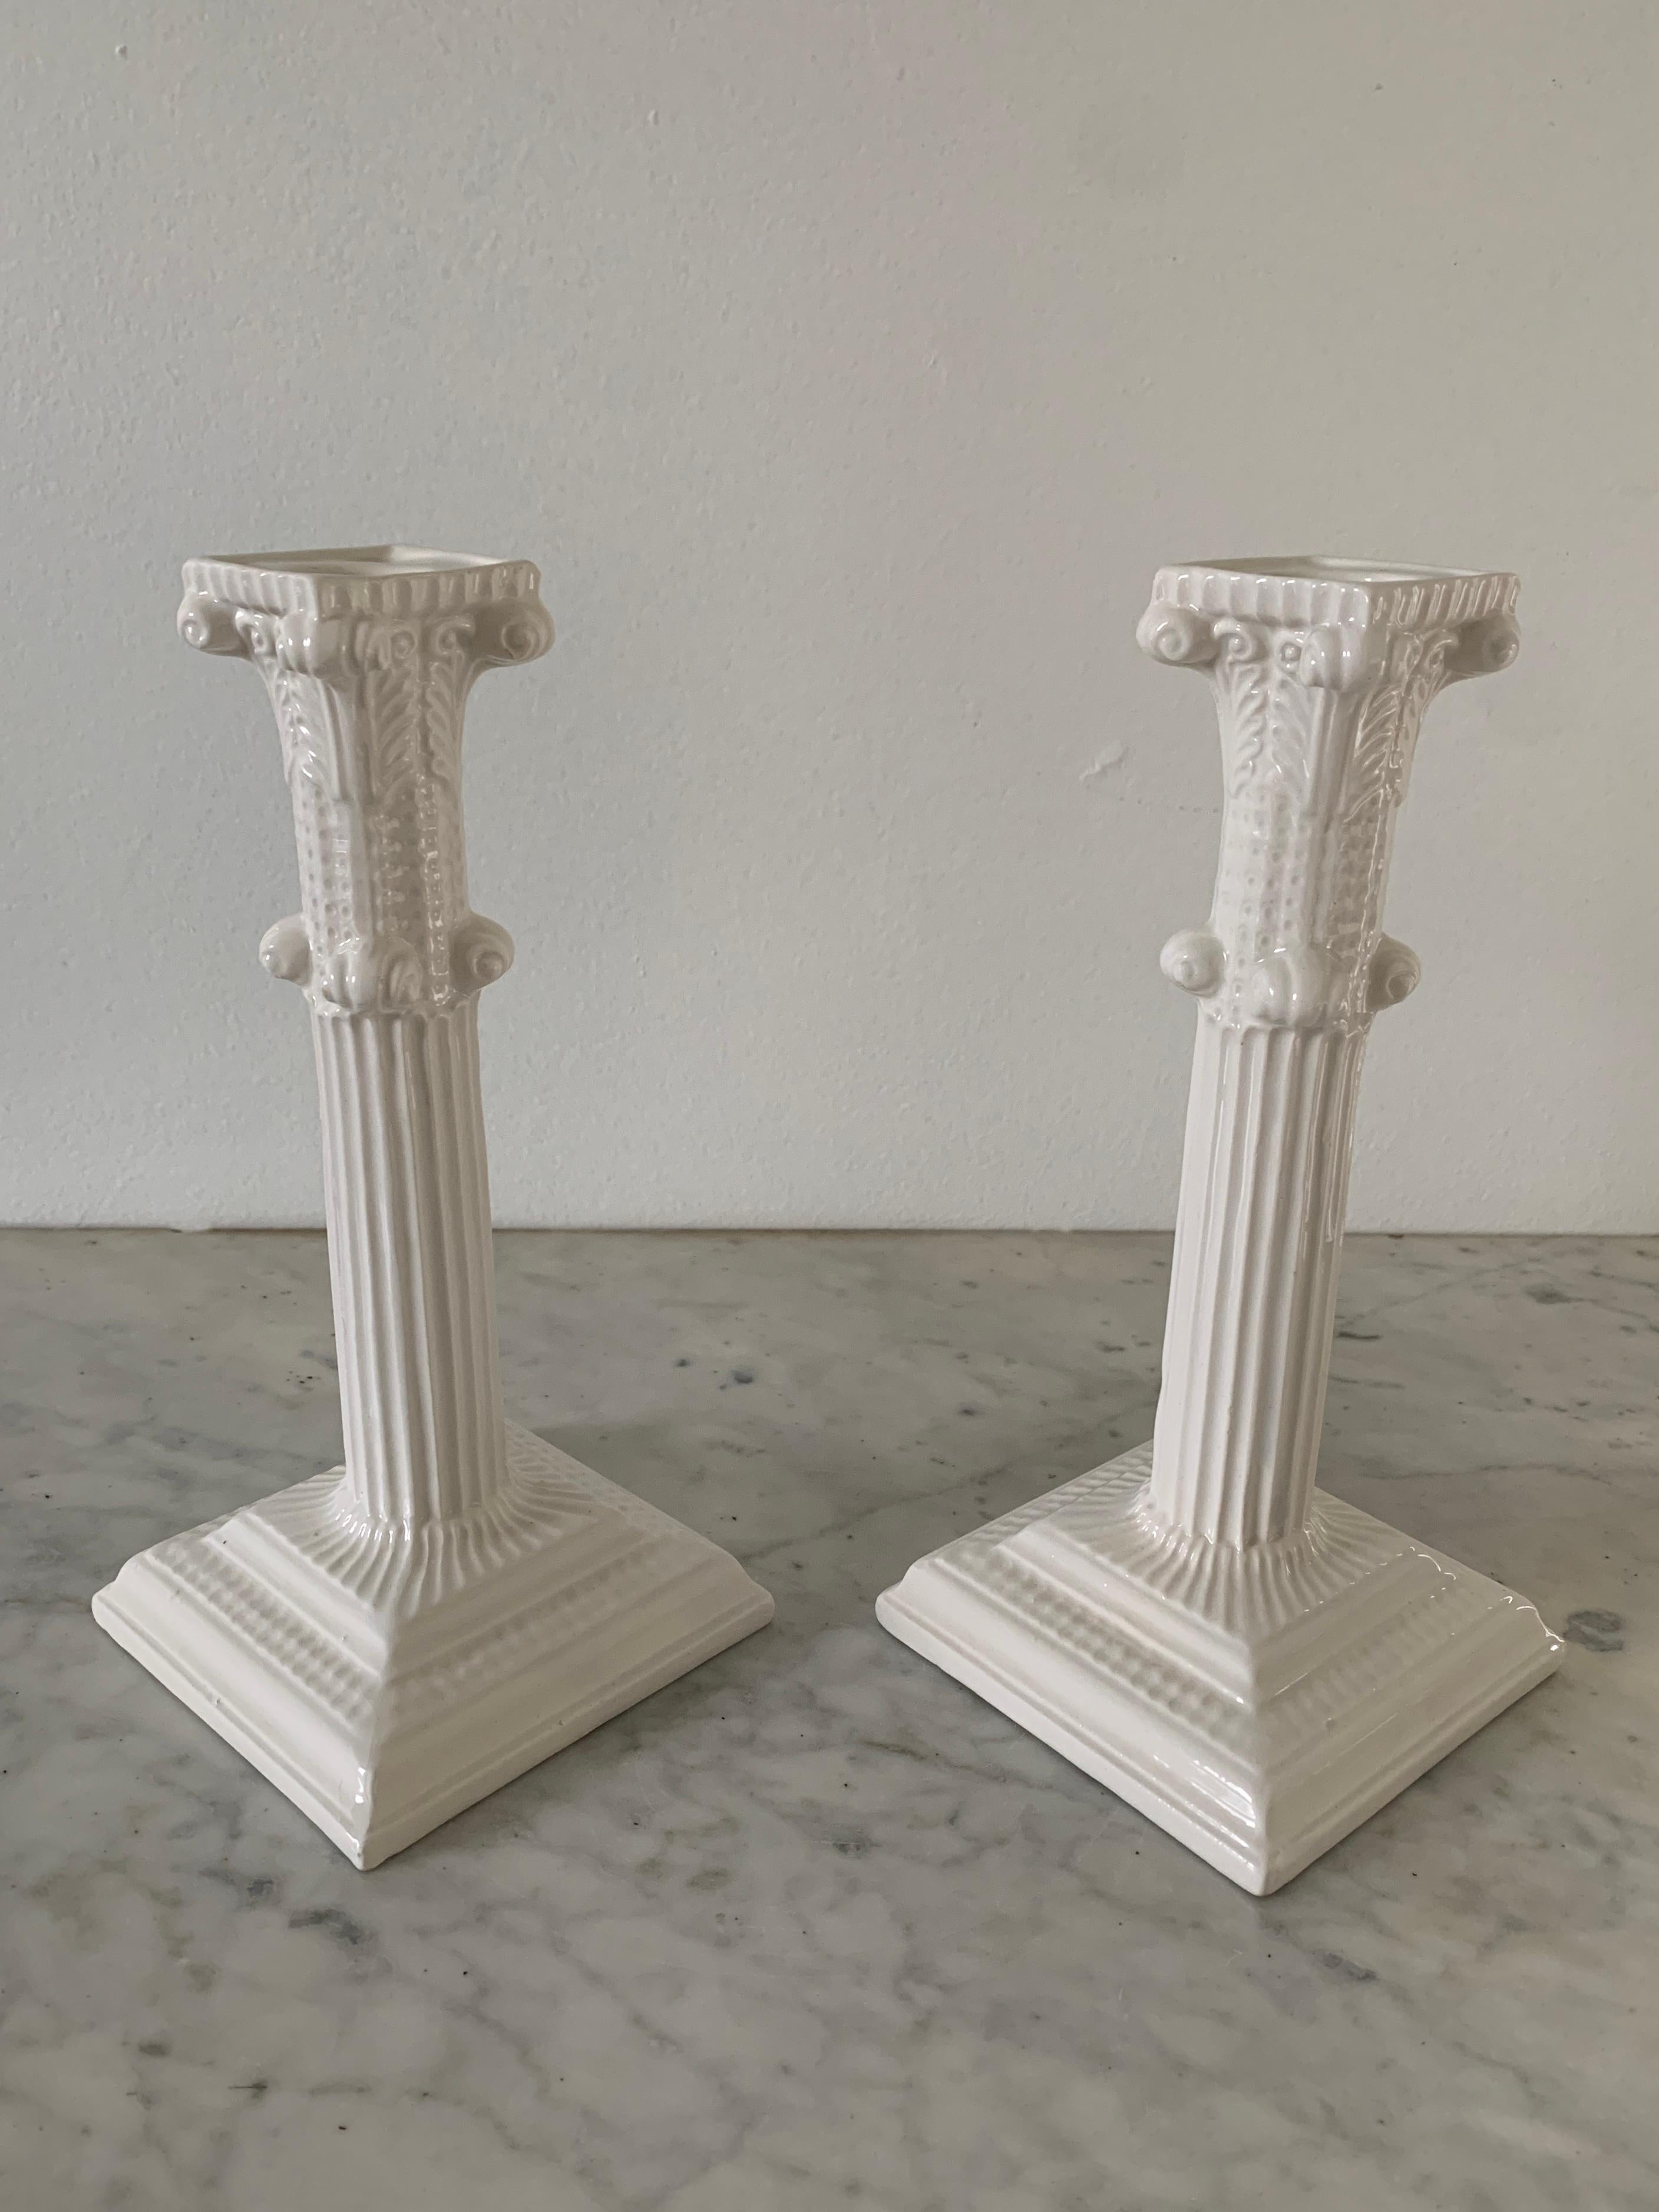 Italian Neoclassical Porcelain Column Candle Holders by Mottahedeh, Pair 2